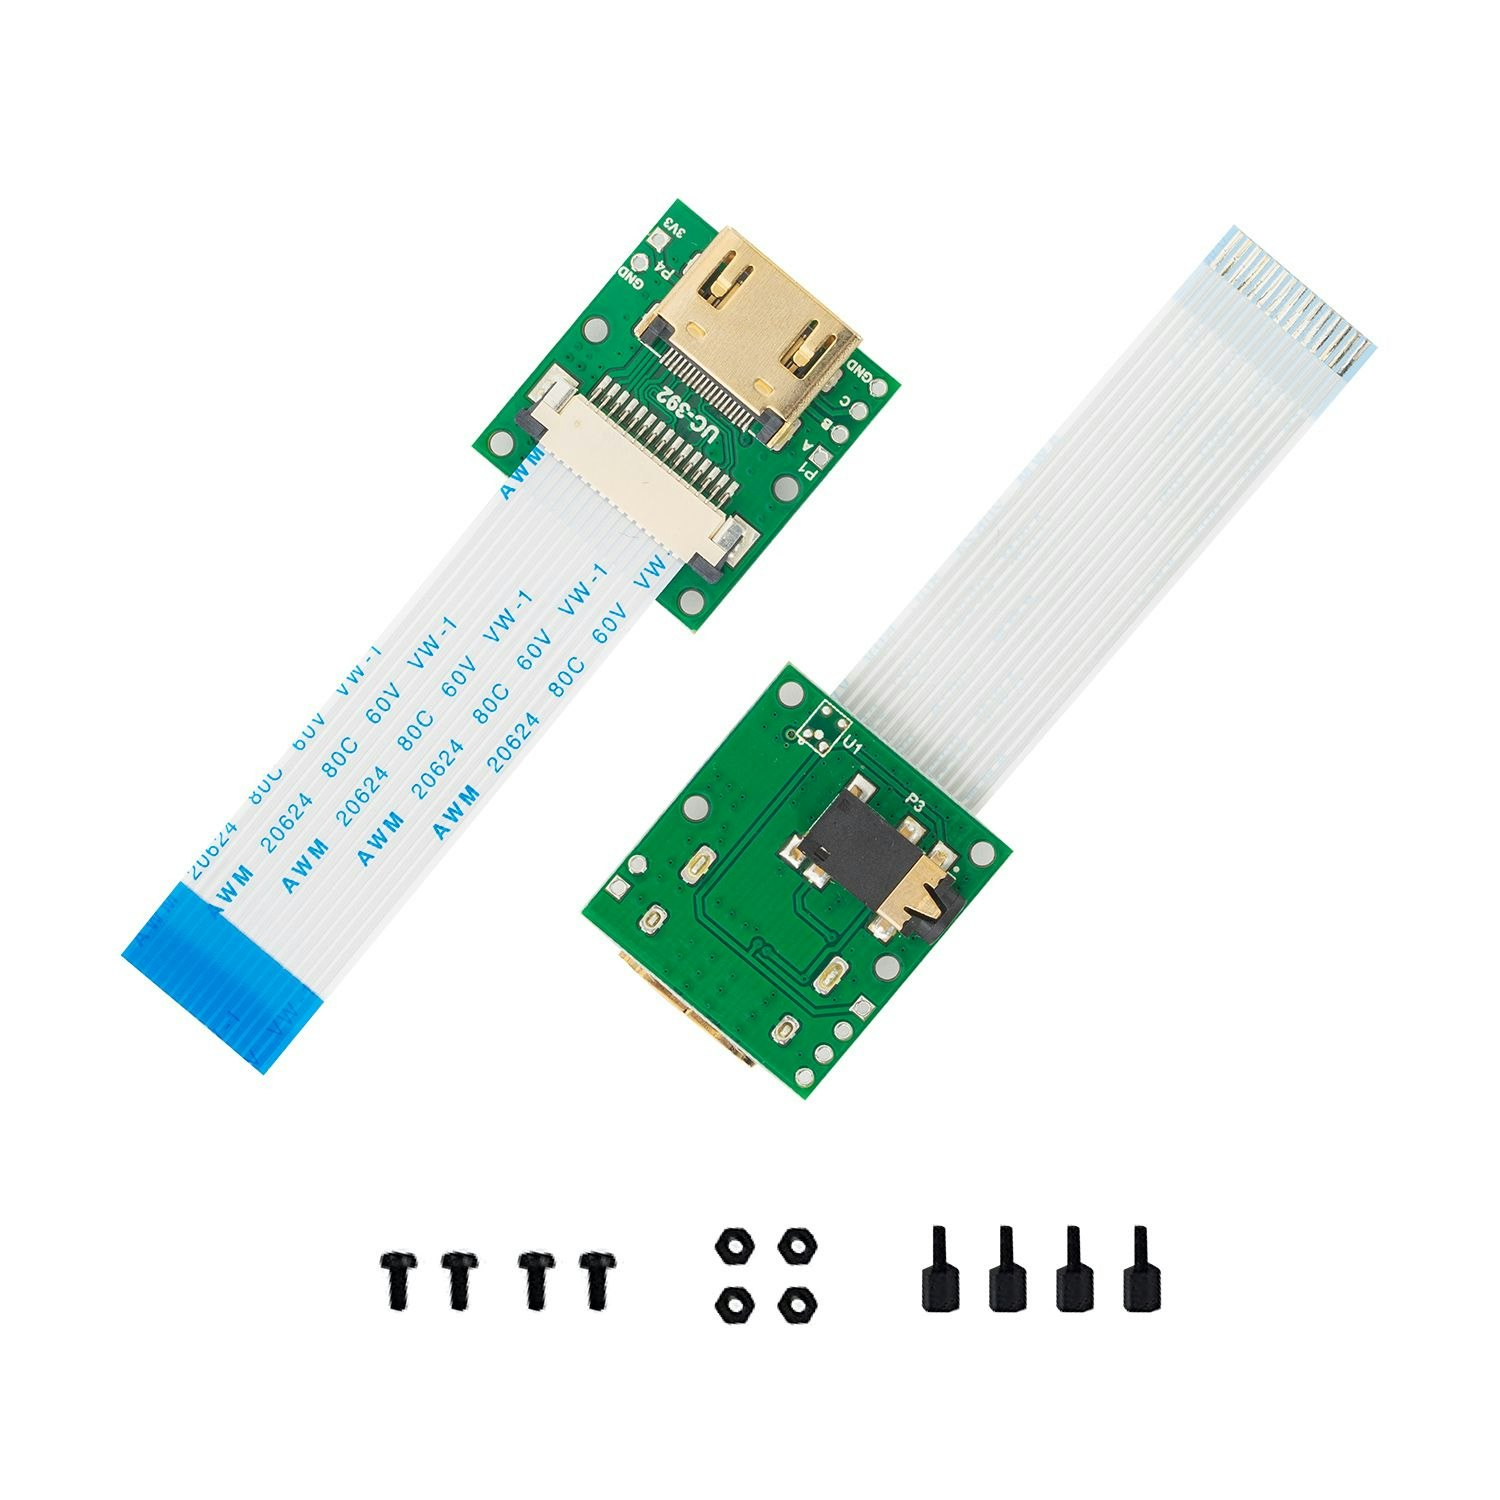 Arducam CSI to HDMI Cable Extension Module with 15pin 60mm FPC Cable for Raspberry Pi Camera